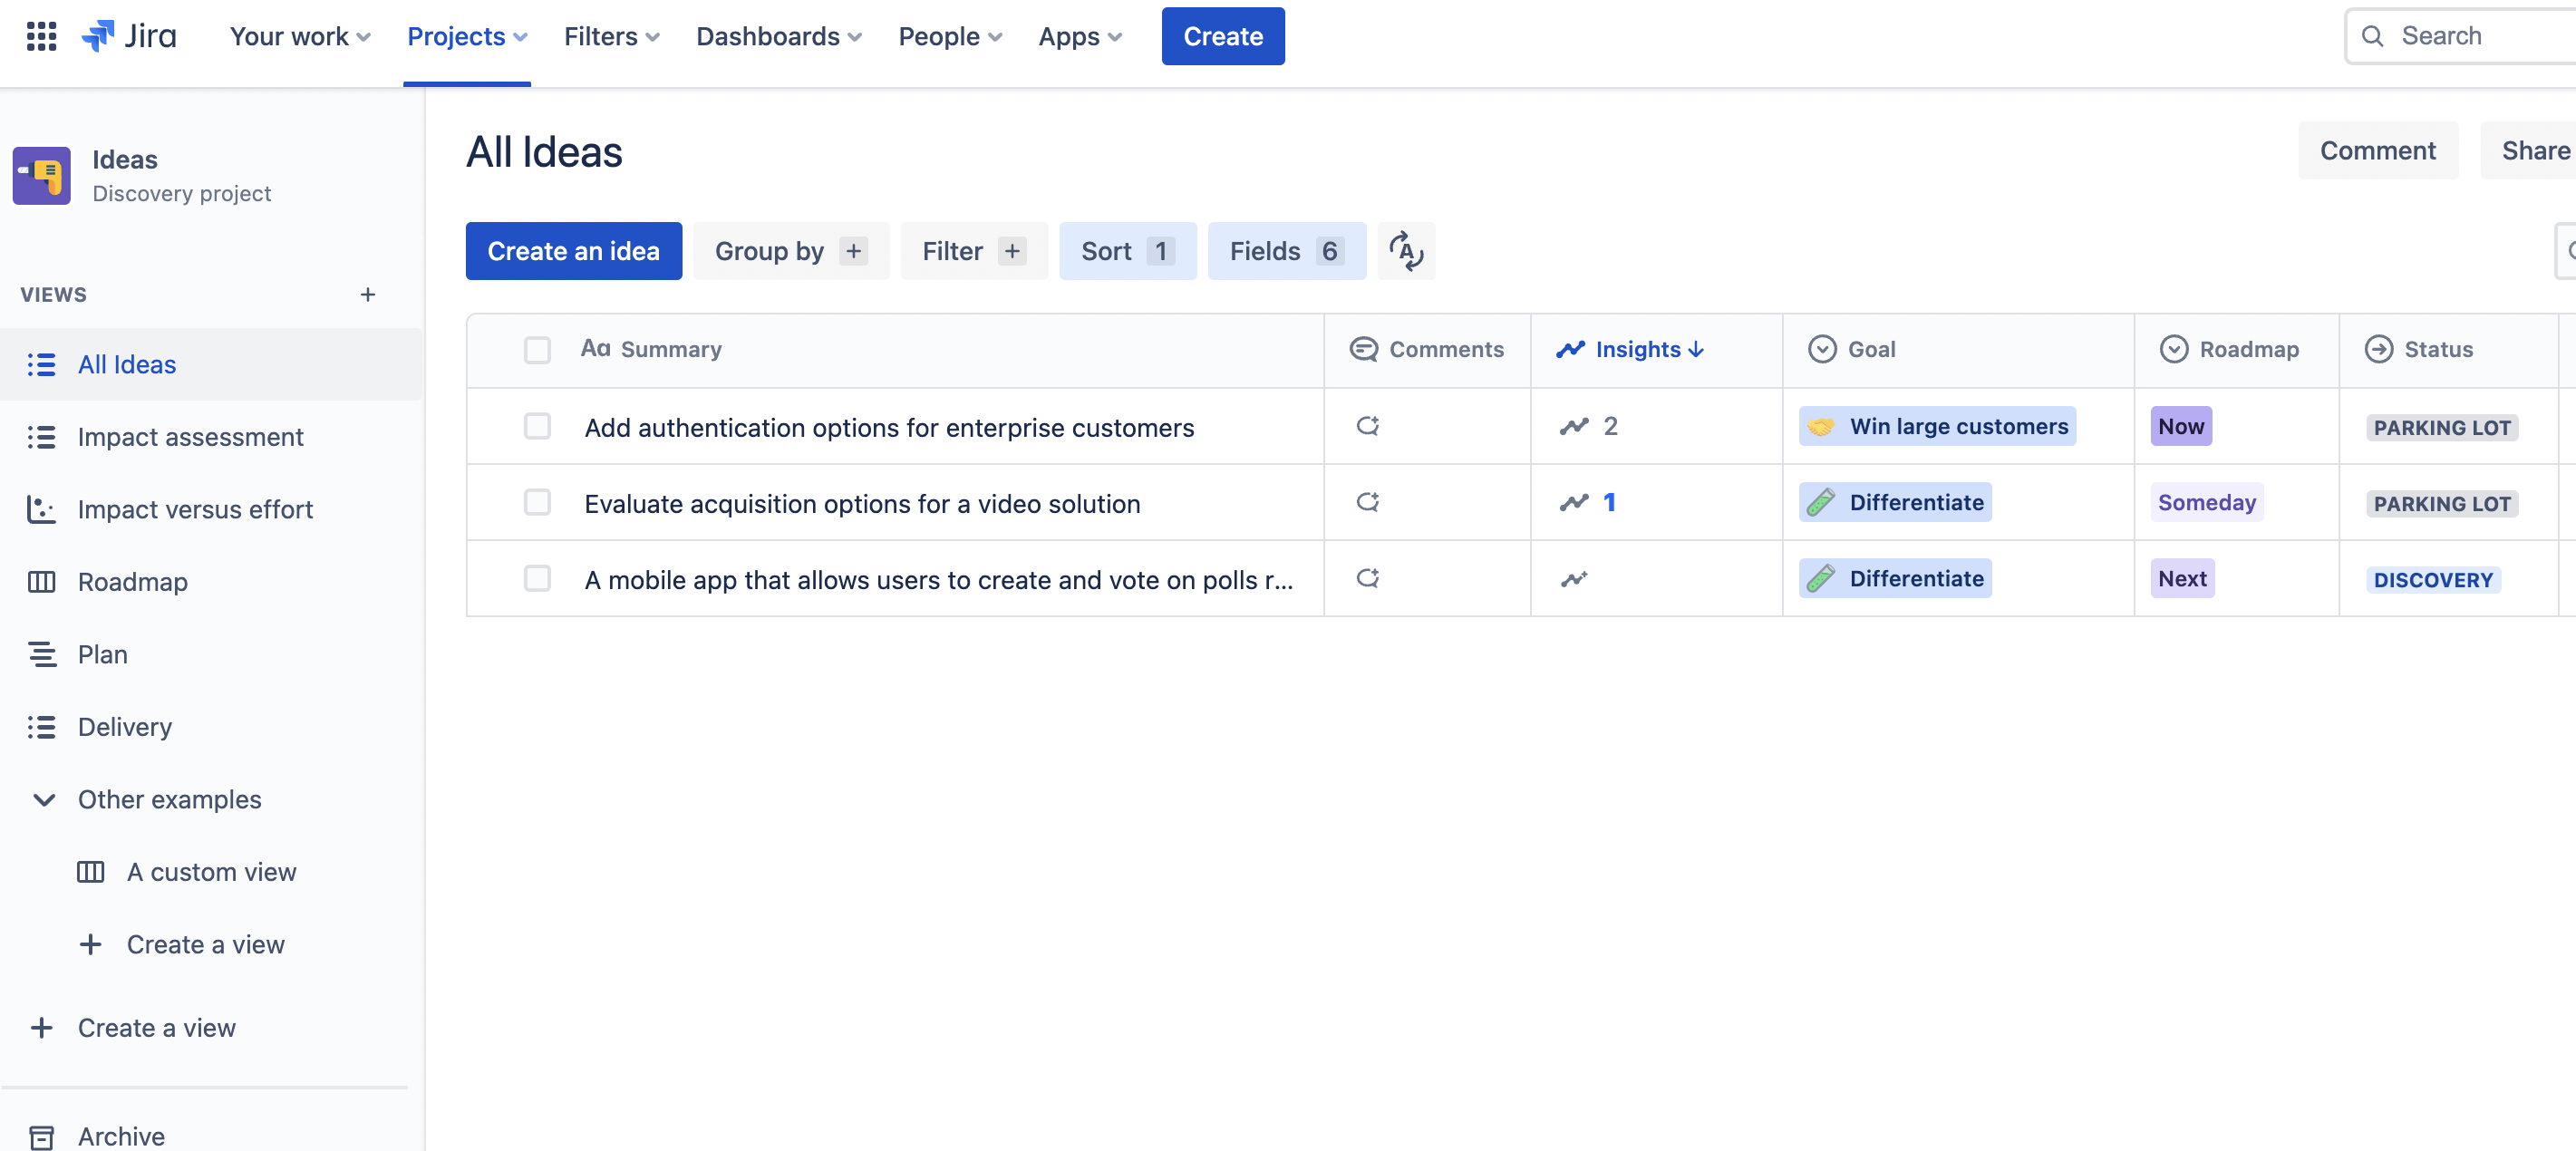 Ideas_Jira Product Discovery